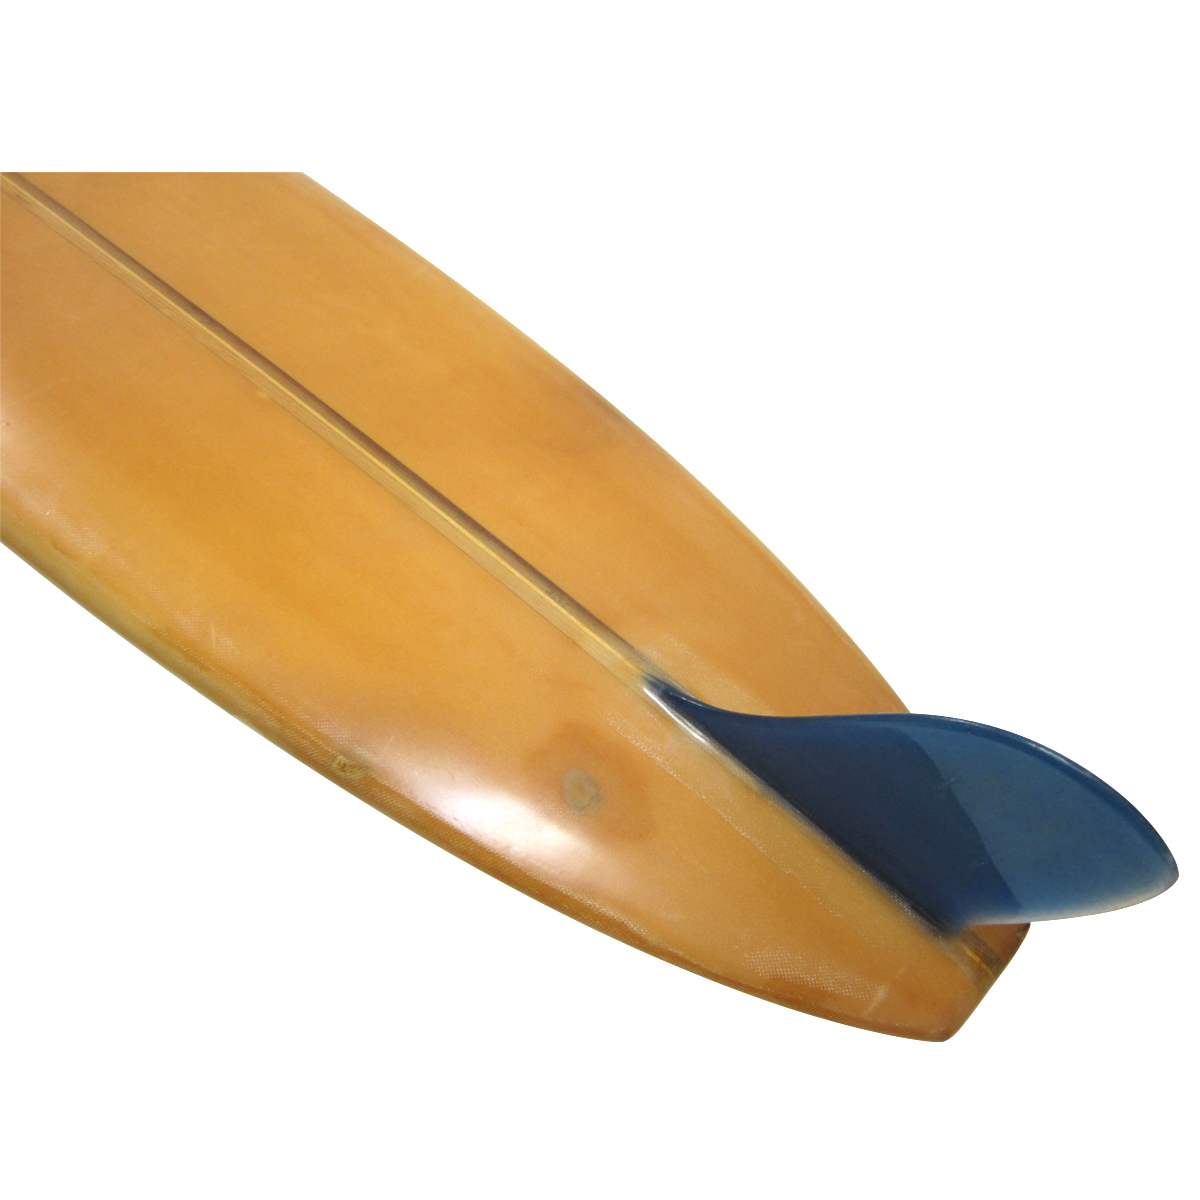 Wardy Surfboards / 60`S PIG